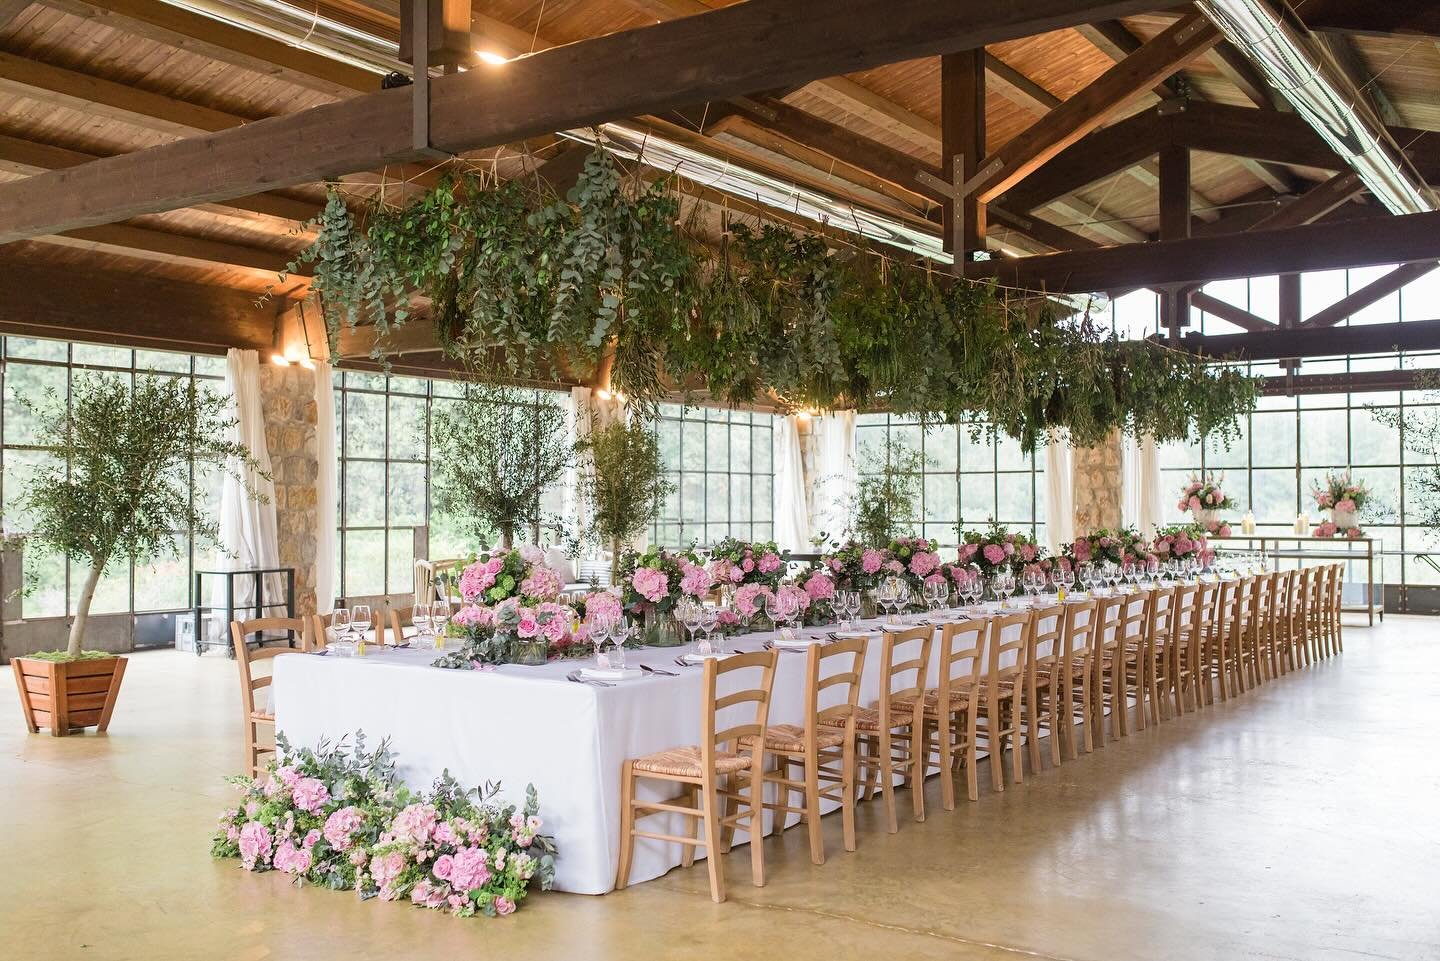 DESTINATION WEDDINGS IN ITALY
Embracing the beauty &amp; romance of Italy for an intimate wedding weekend filled with the brides favourite florals. Blousy pink peonies, hydrangeas &amp; roses intertwined with fragrant eucalyptus, rosemary &amp; nativ